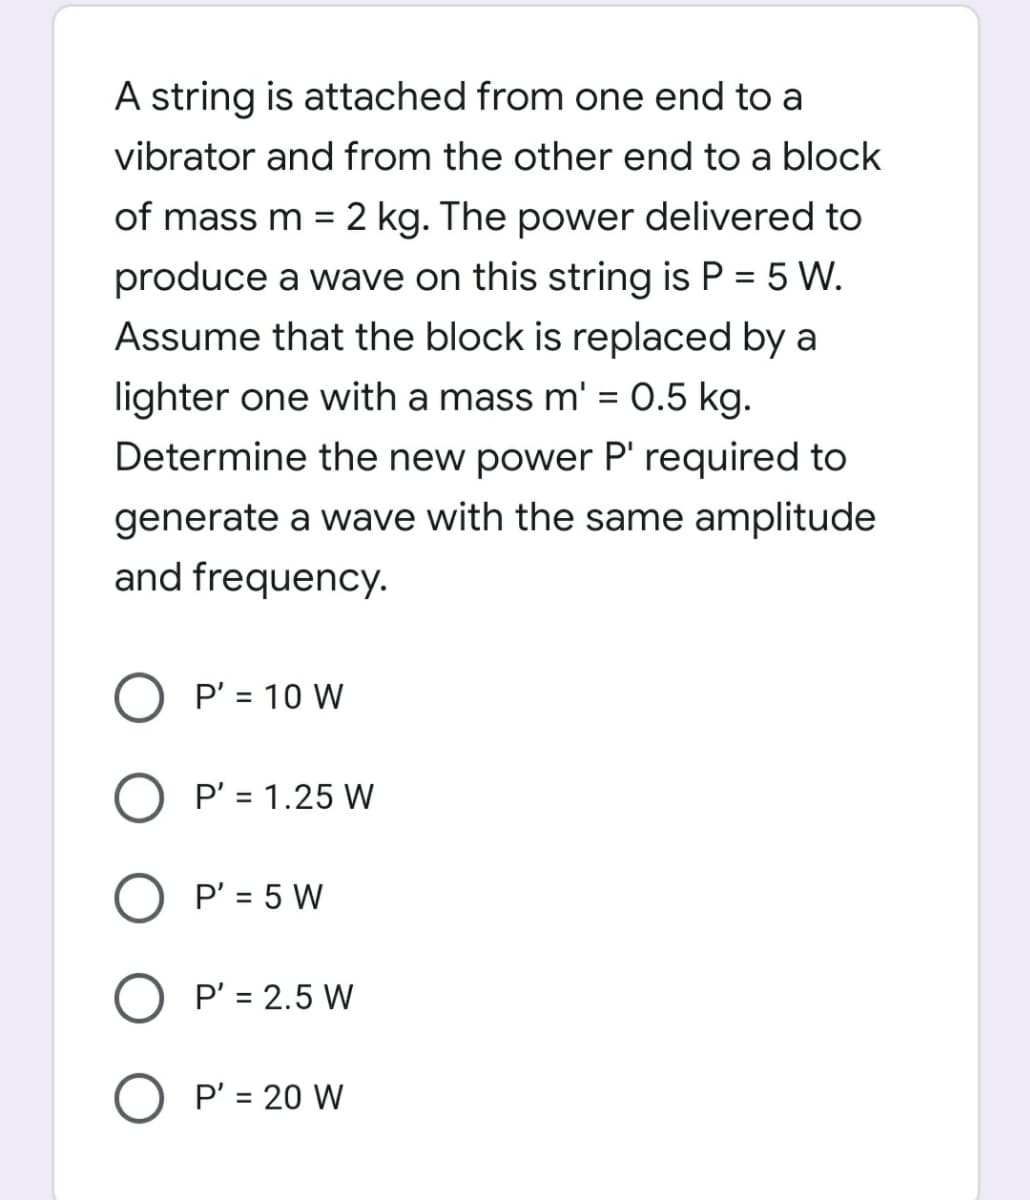 A string is attached from one end to a
vibrator and from the other end to a block
of mass m = 2 kg. The power delivered to
produce a wave on this string is P = 5 W.
Assume that the block is replaced by a
%3D
lighter one with a mass m' = 0.5 kg.
Determine the new power P' required to
generate a wave with the same amplitude
and frequency.
O P' = 10 W
%3D
P' = 1.25 W
P' = 5 W
O P' = 2.5 W
P' = 20 W
%3D
